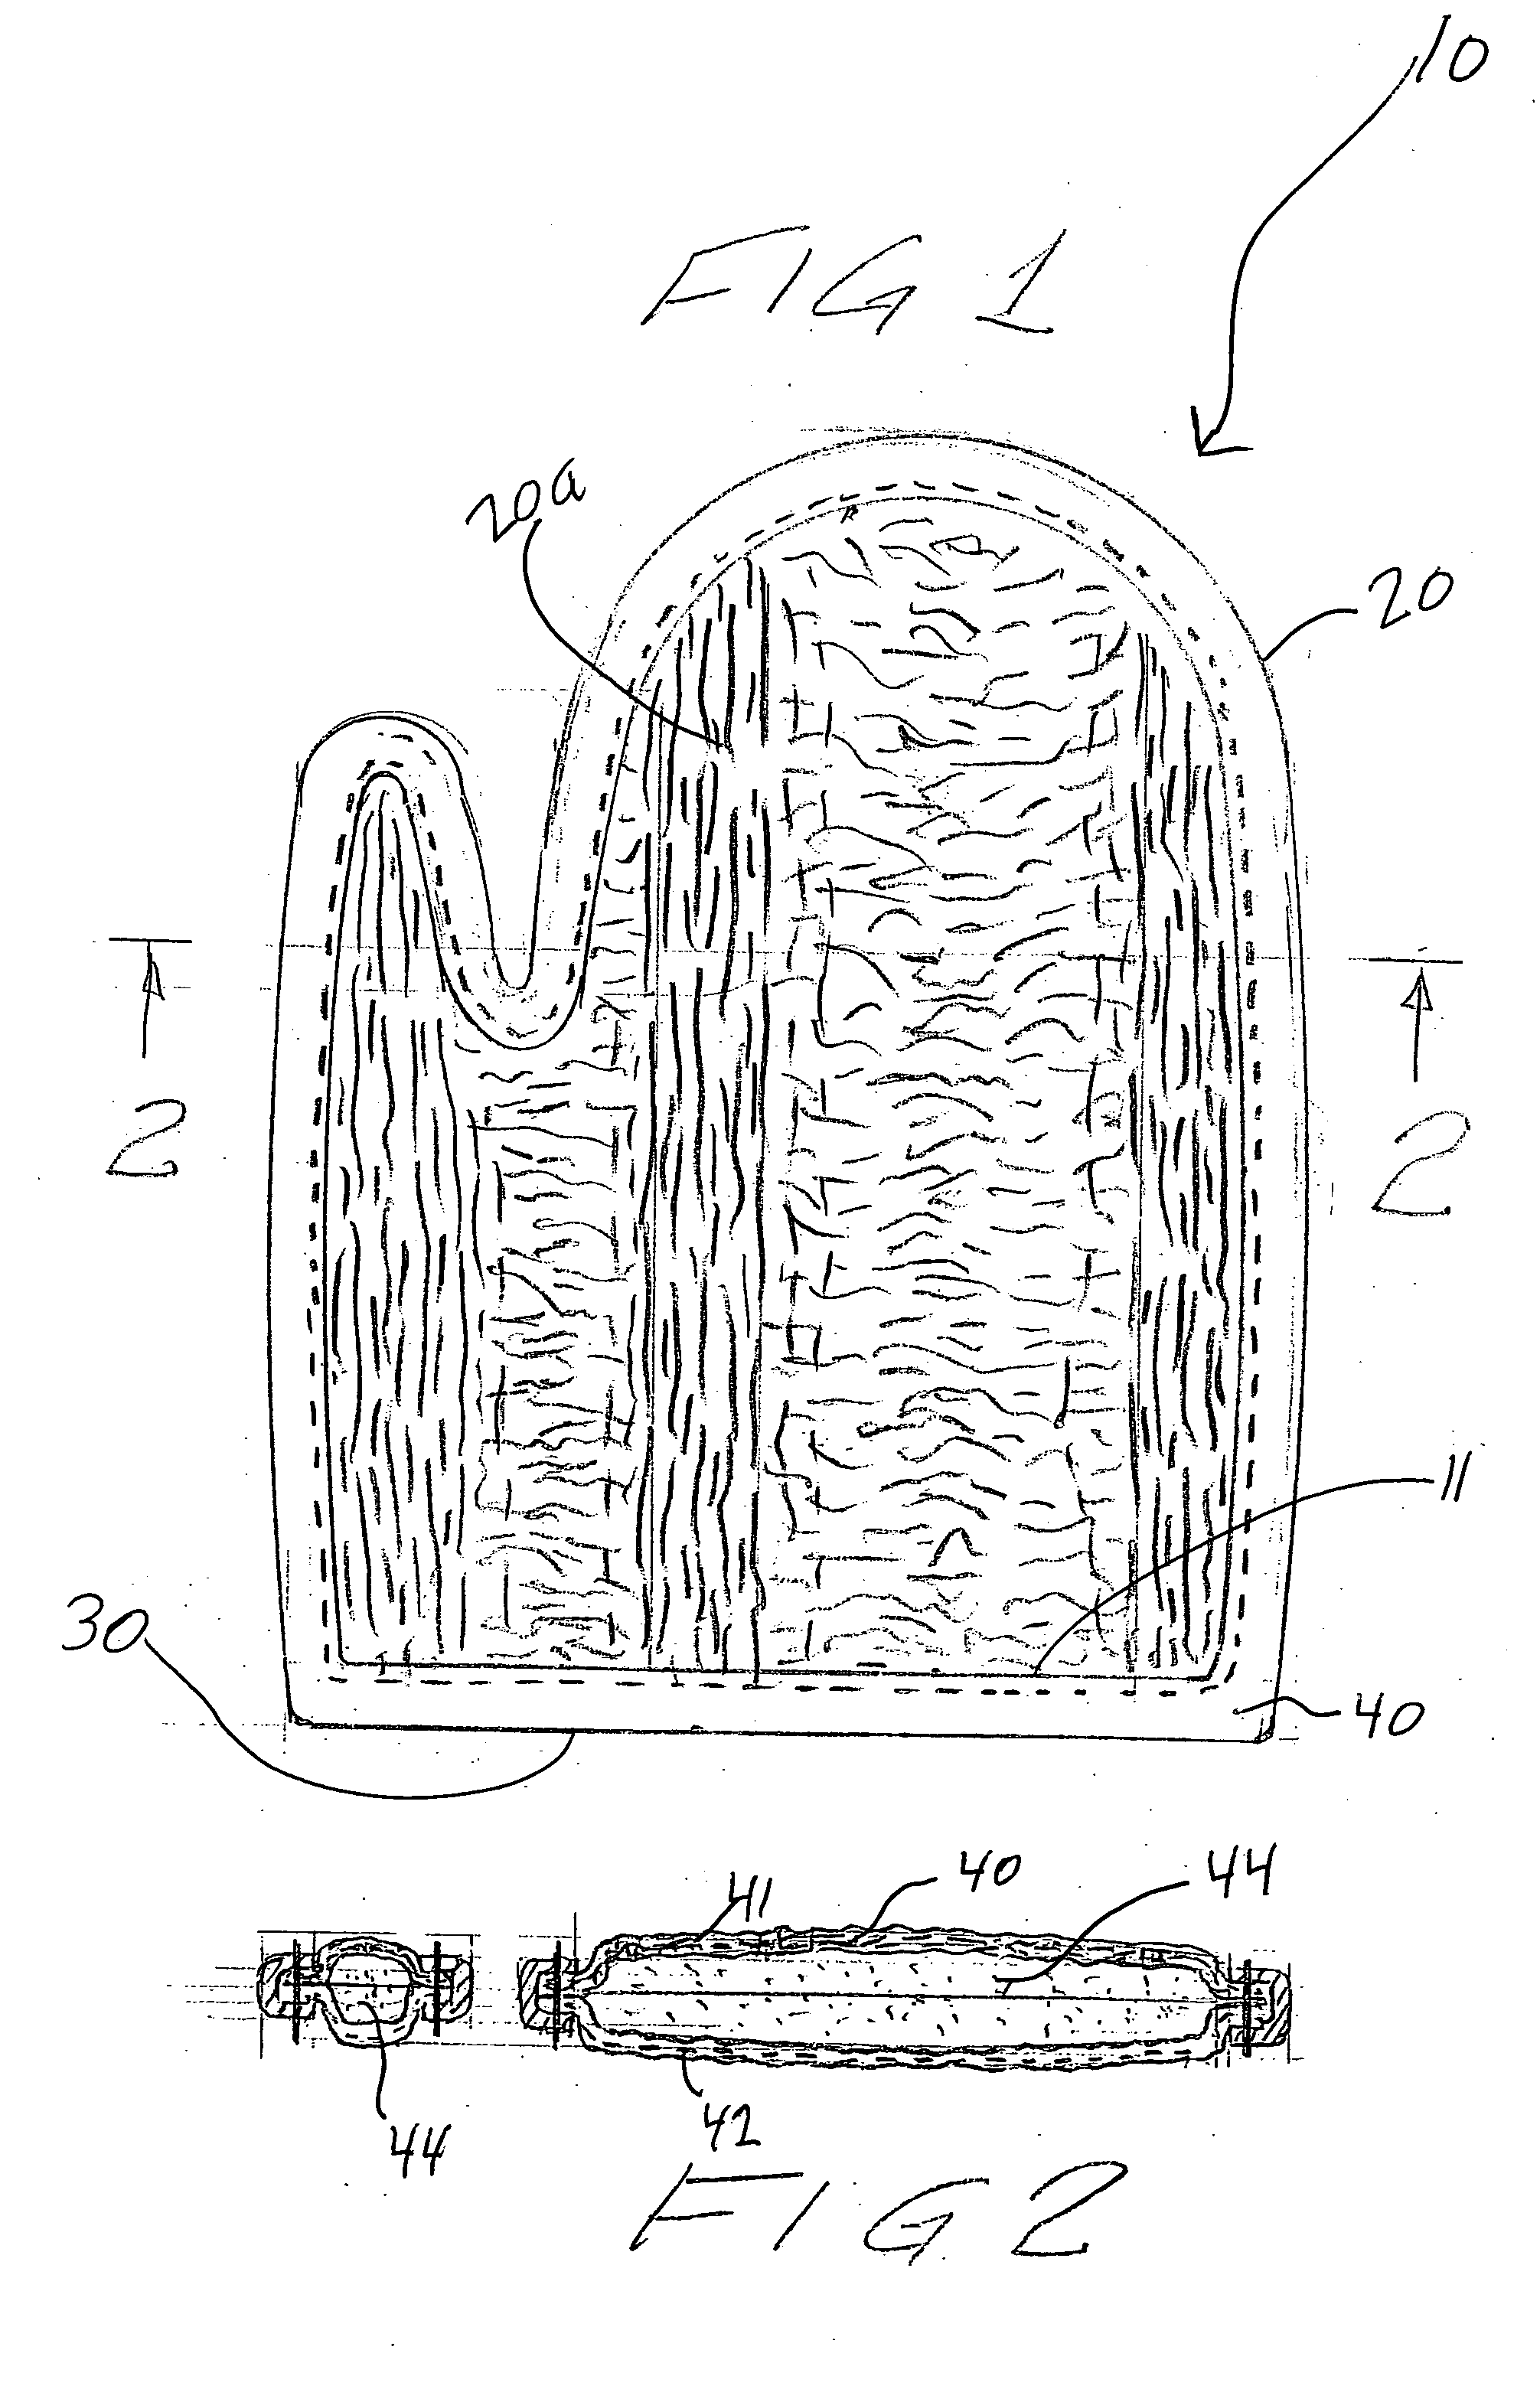 Loofah washcloth with varied areas of coarseness and method